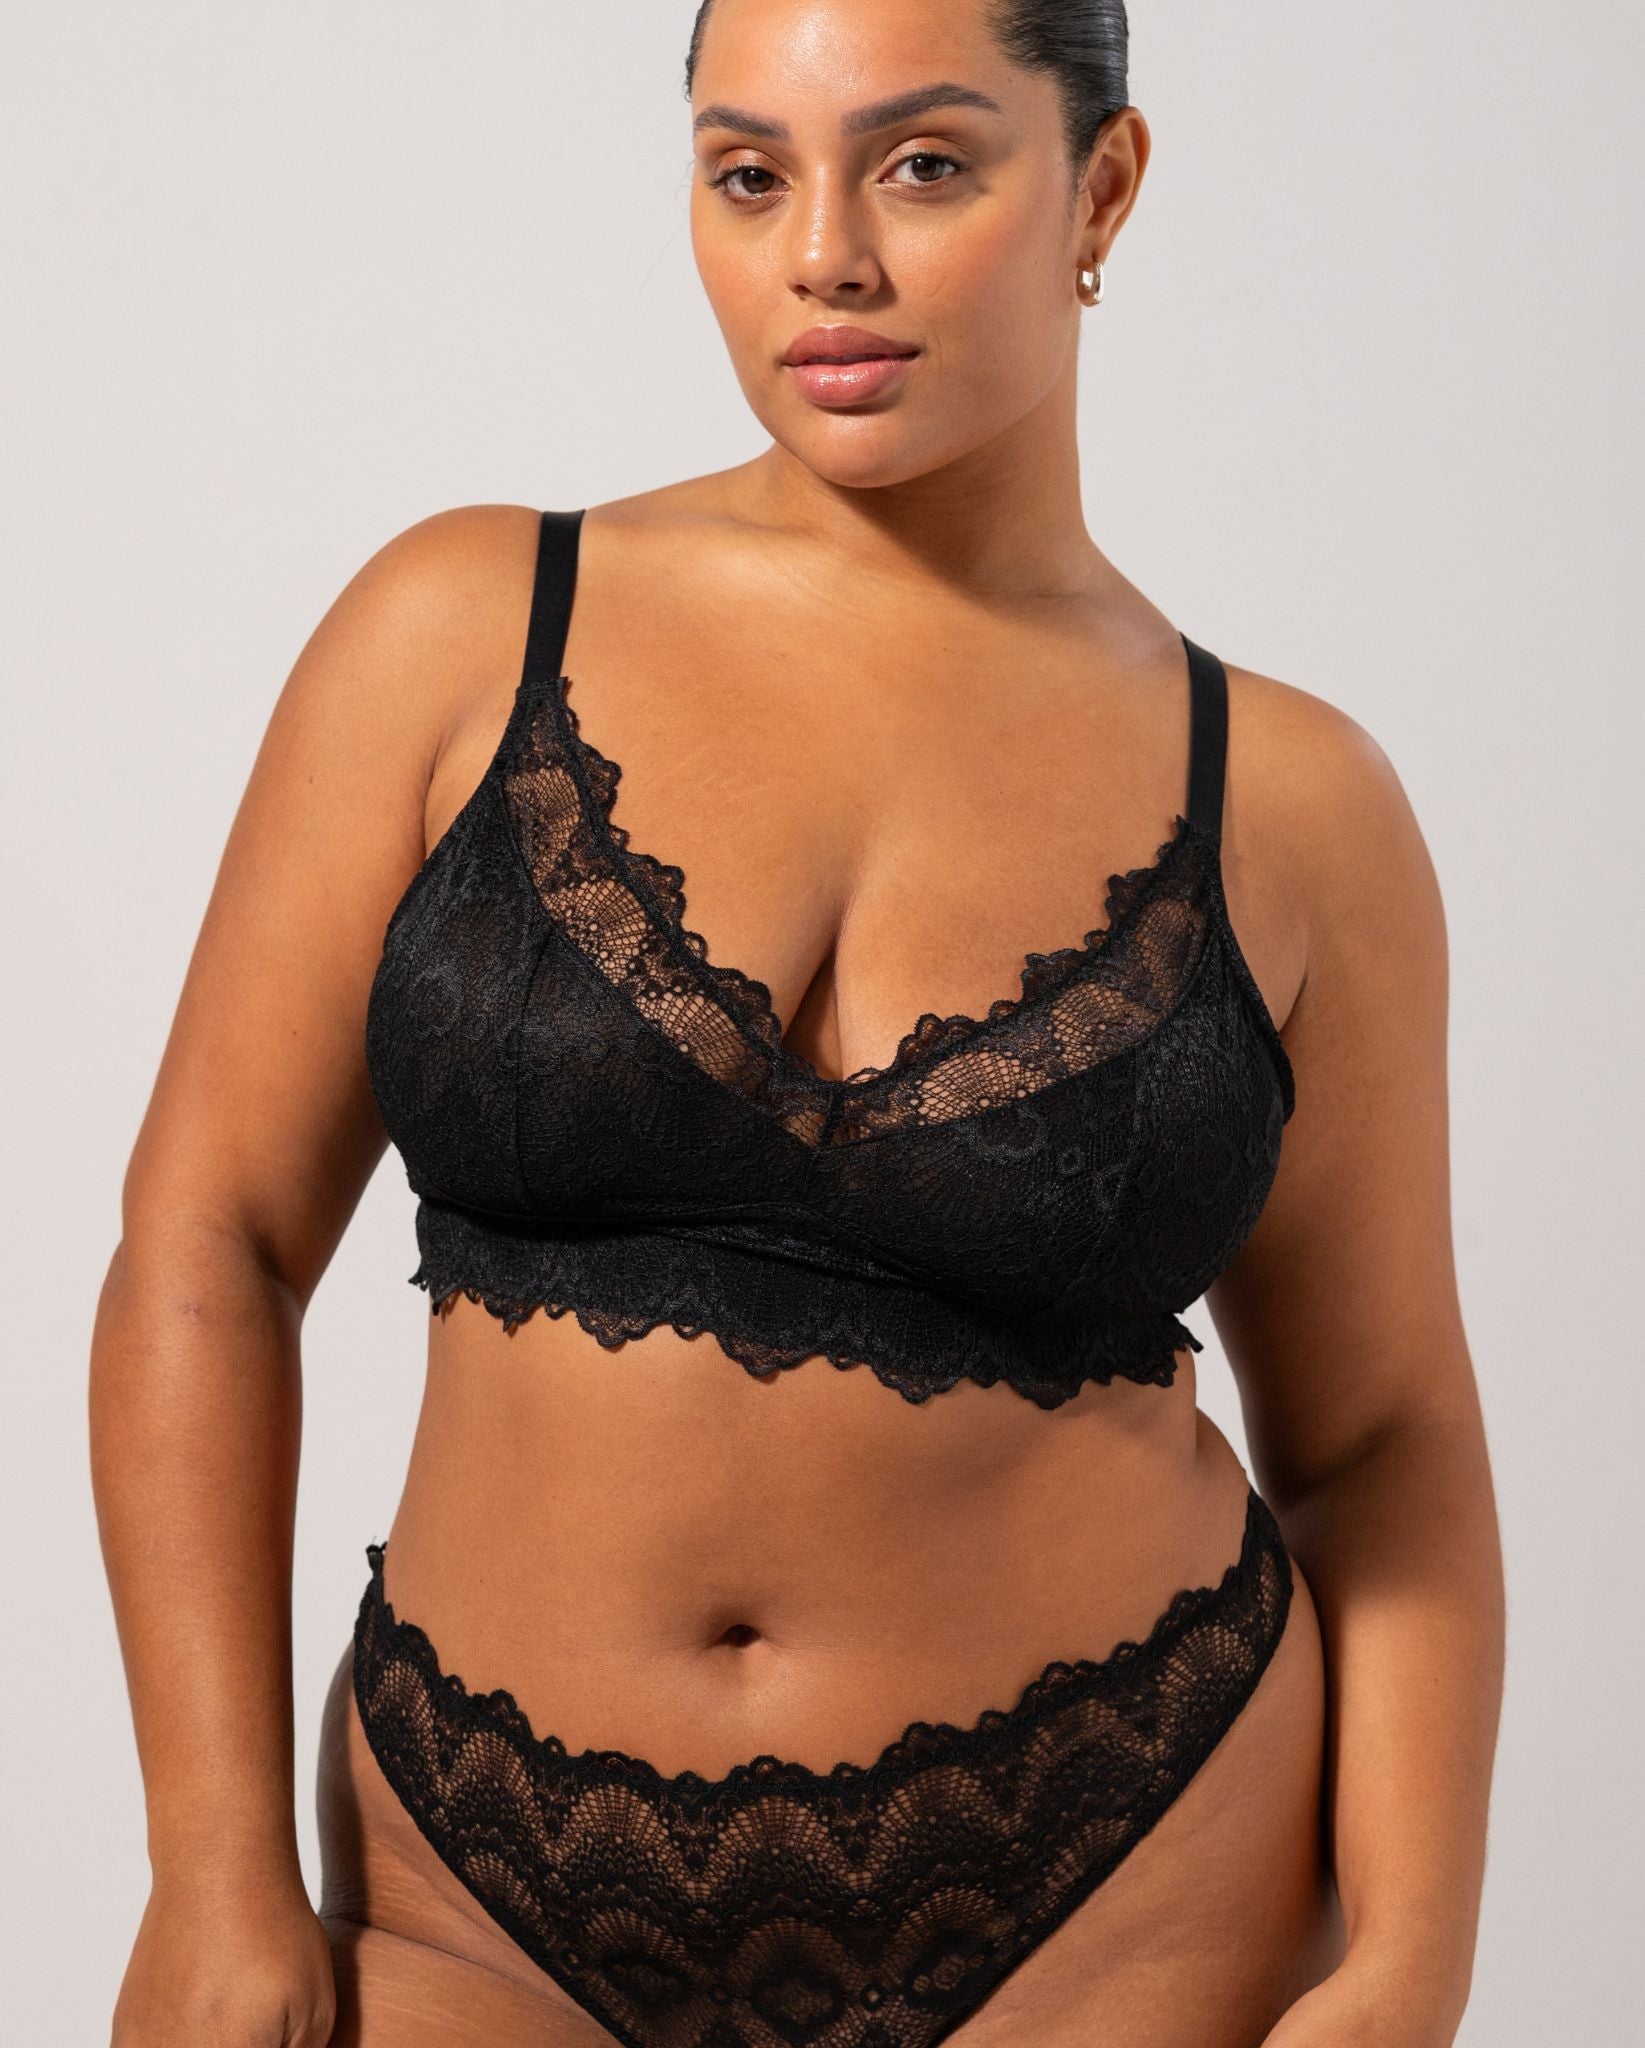 Wholesale black sexy big breast lingerie For An Irresistible Look 